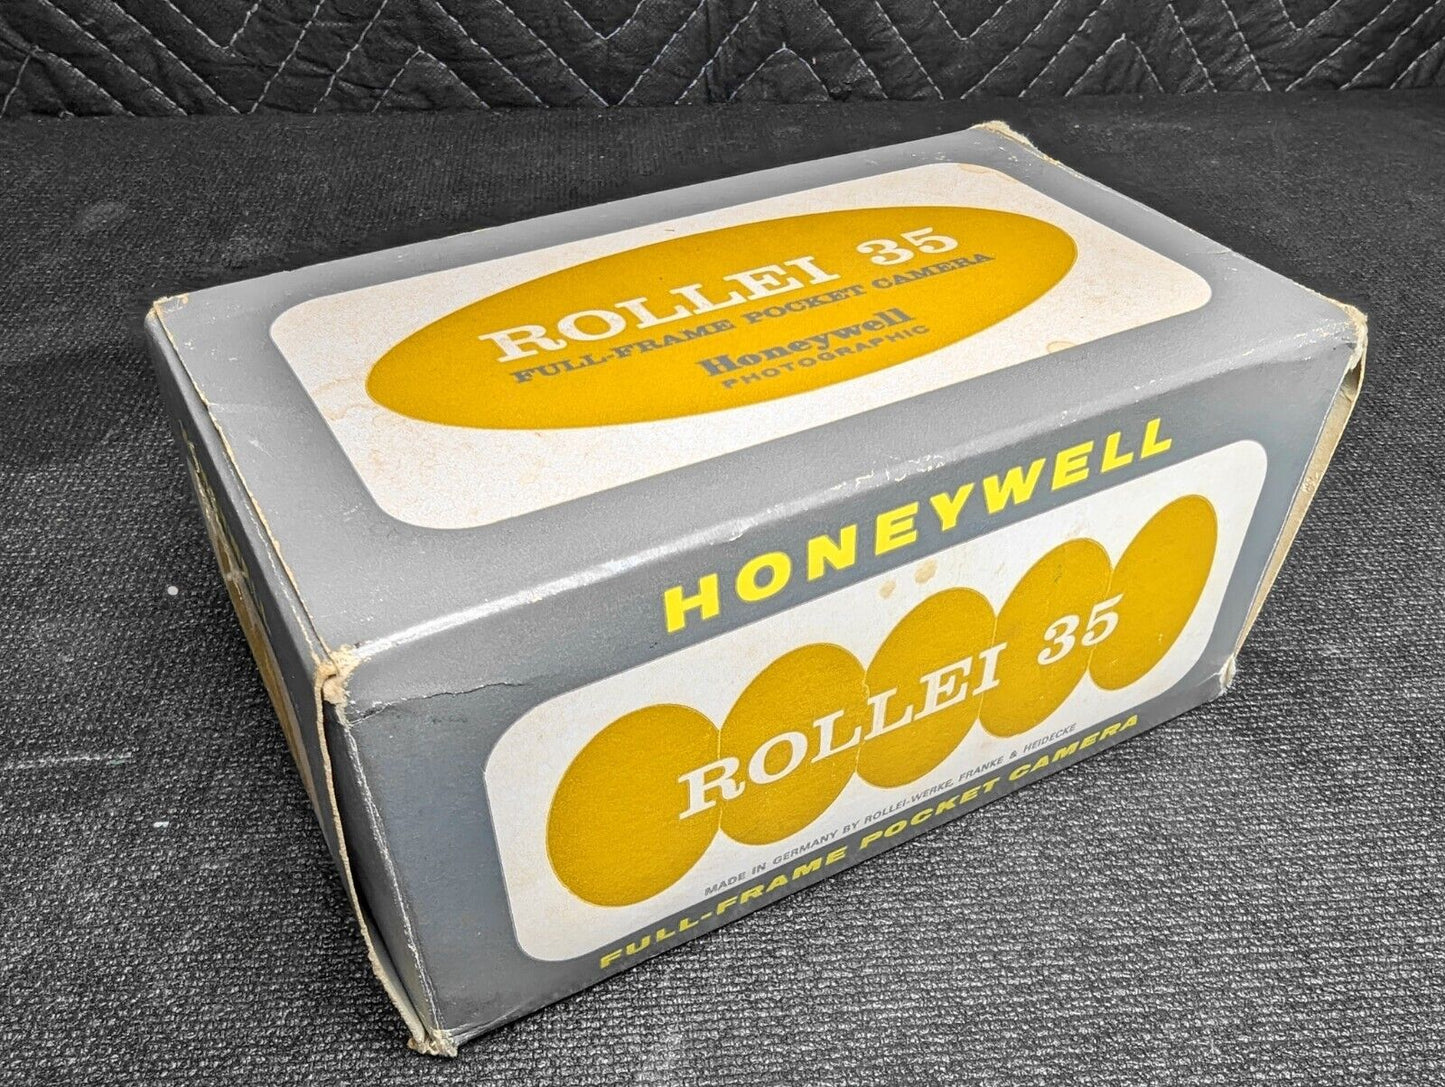 Rollei 35 Germany with 40mm f3.5 Tessar Lens - Box, Leather Pouch, Batt & Manual